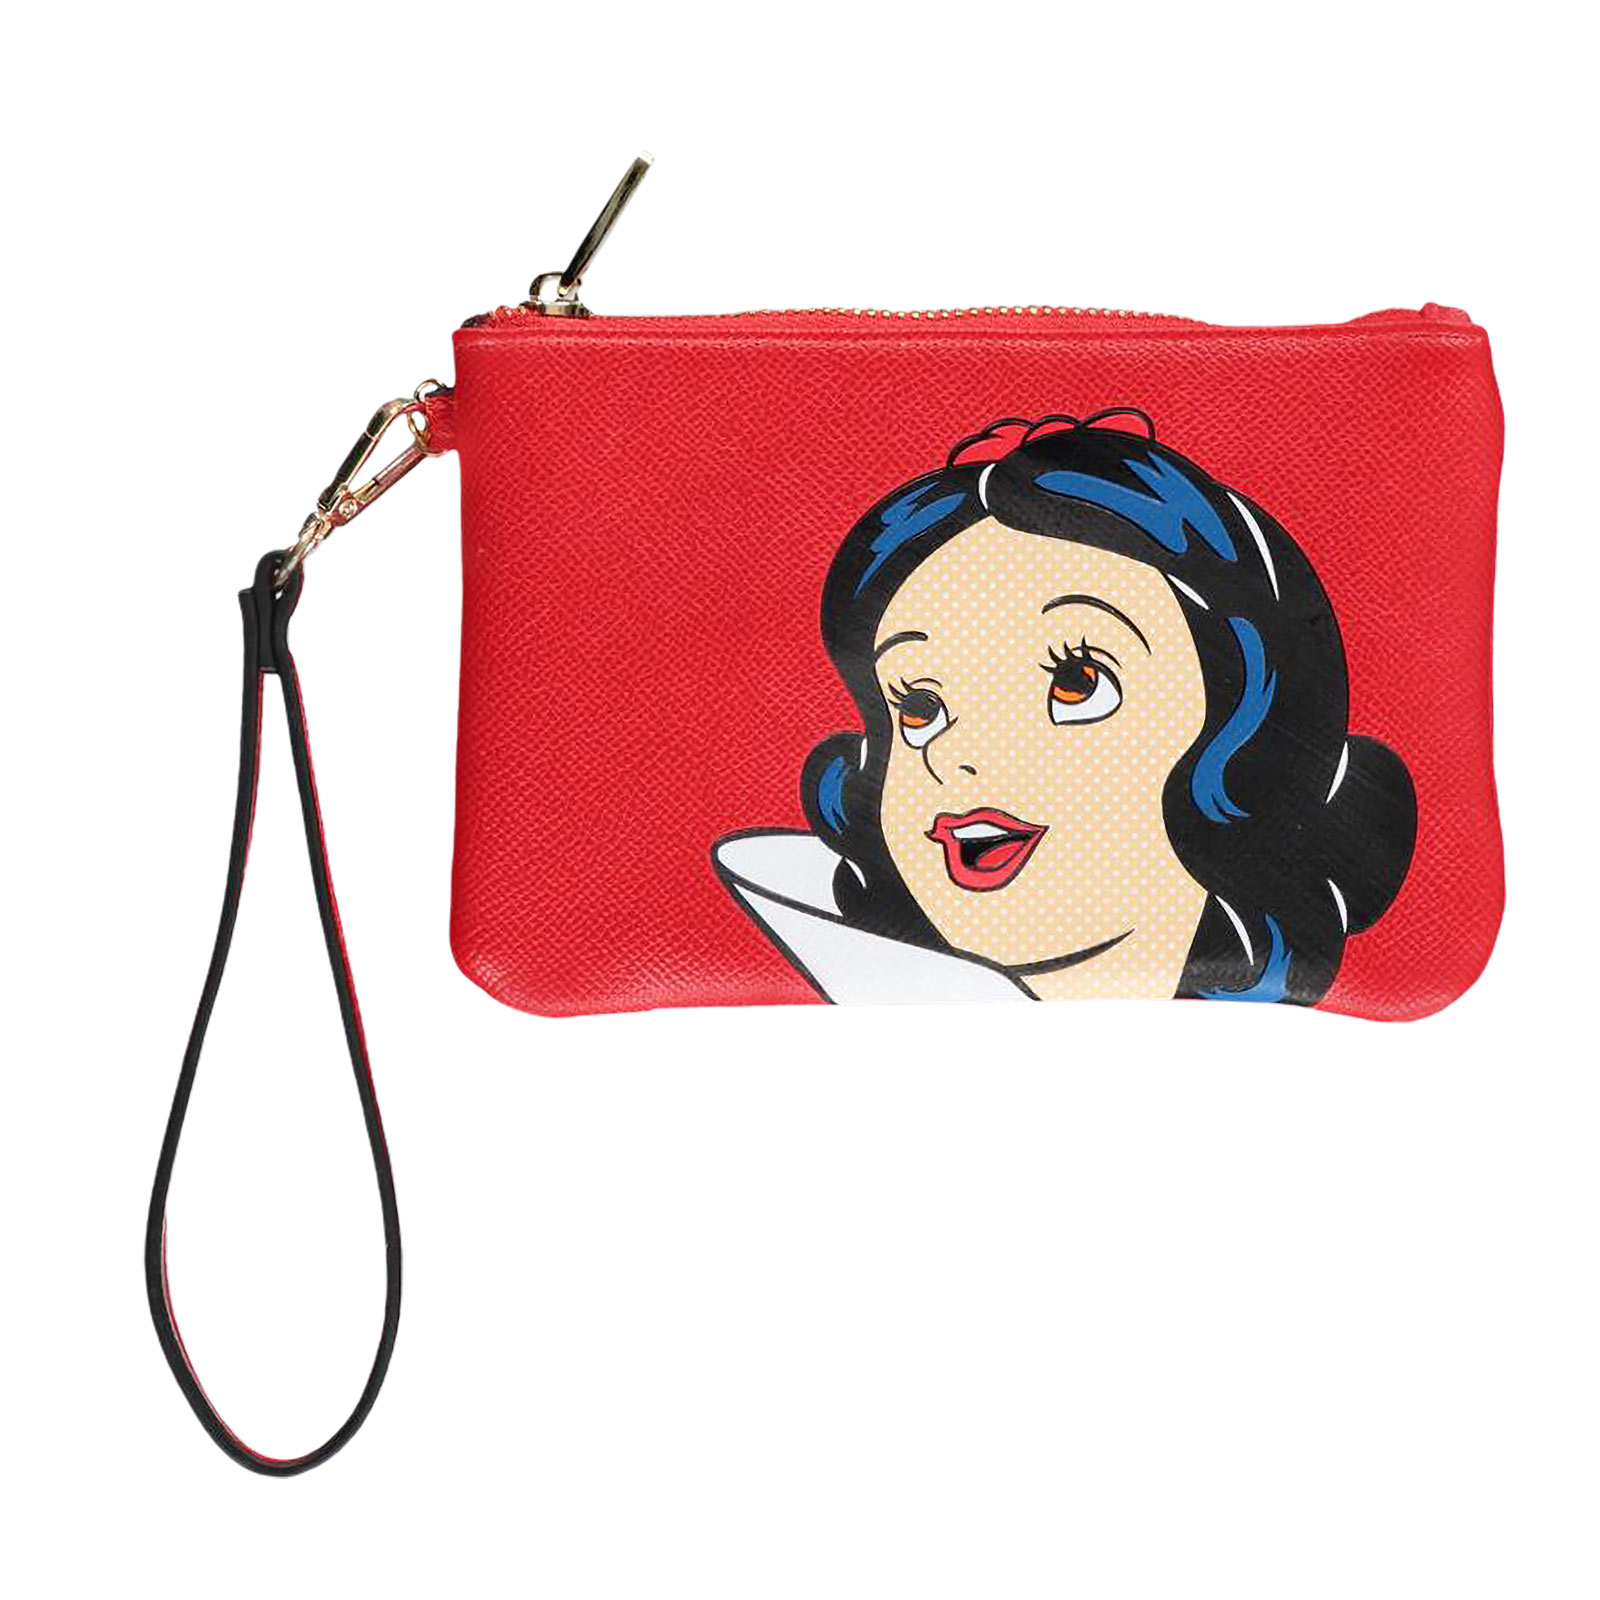 Snow White cosmetic bag red